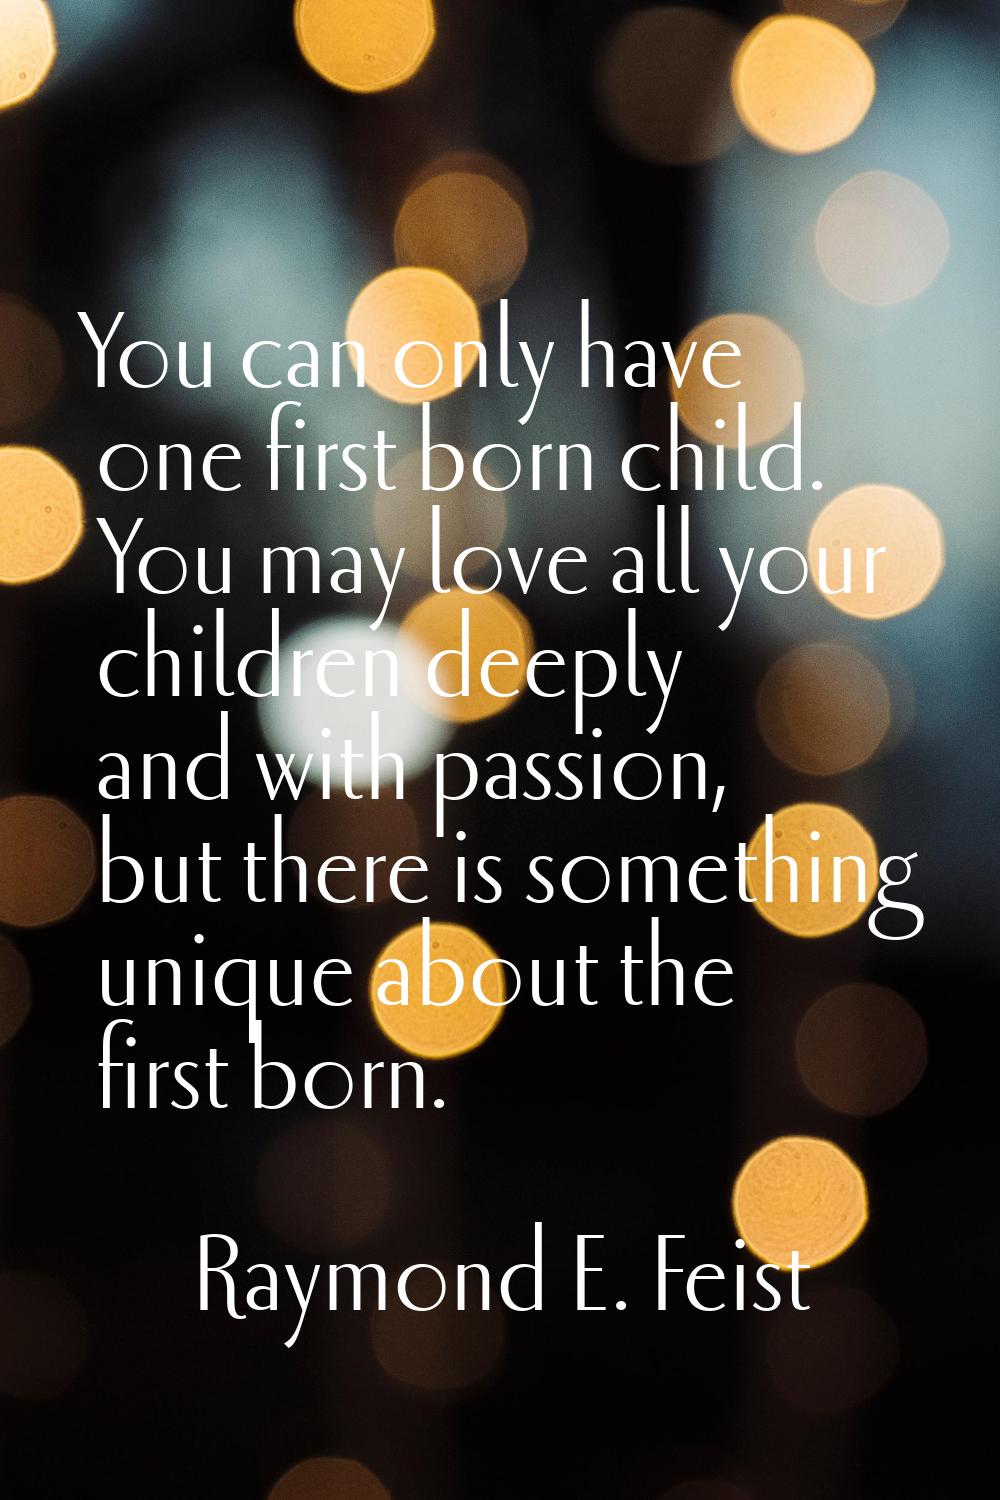 You can only have one first born child. You may love all your children deeply and with passion, but